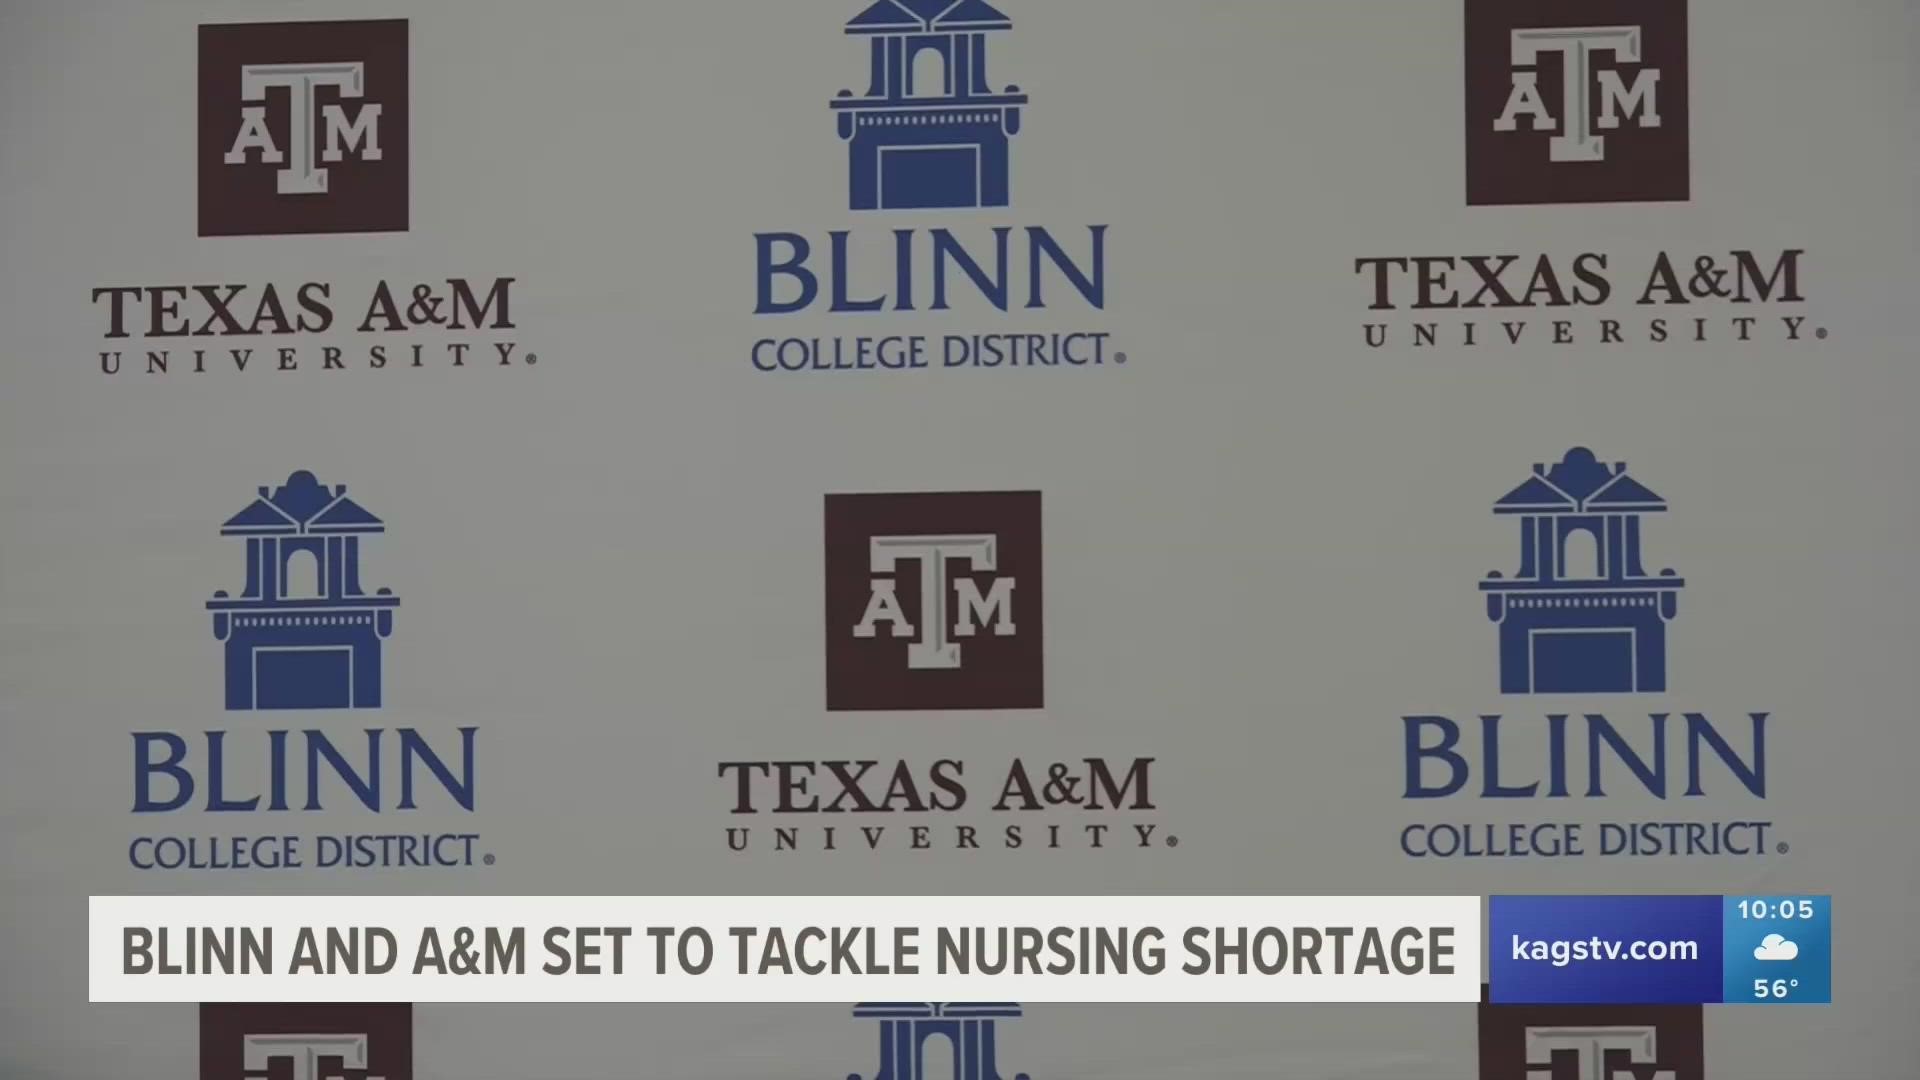 The program will allow Blinn students to earn their related Nursing associate and bachelor's degrees at a faster pace so they can enter the workforce sooner.